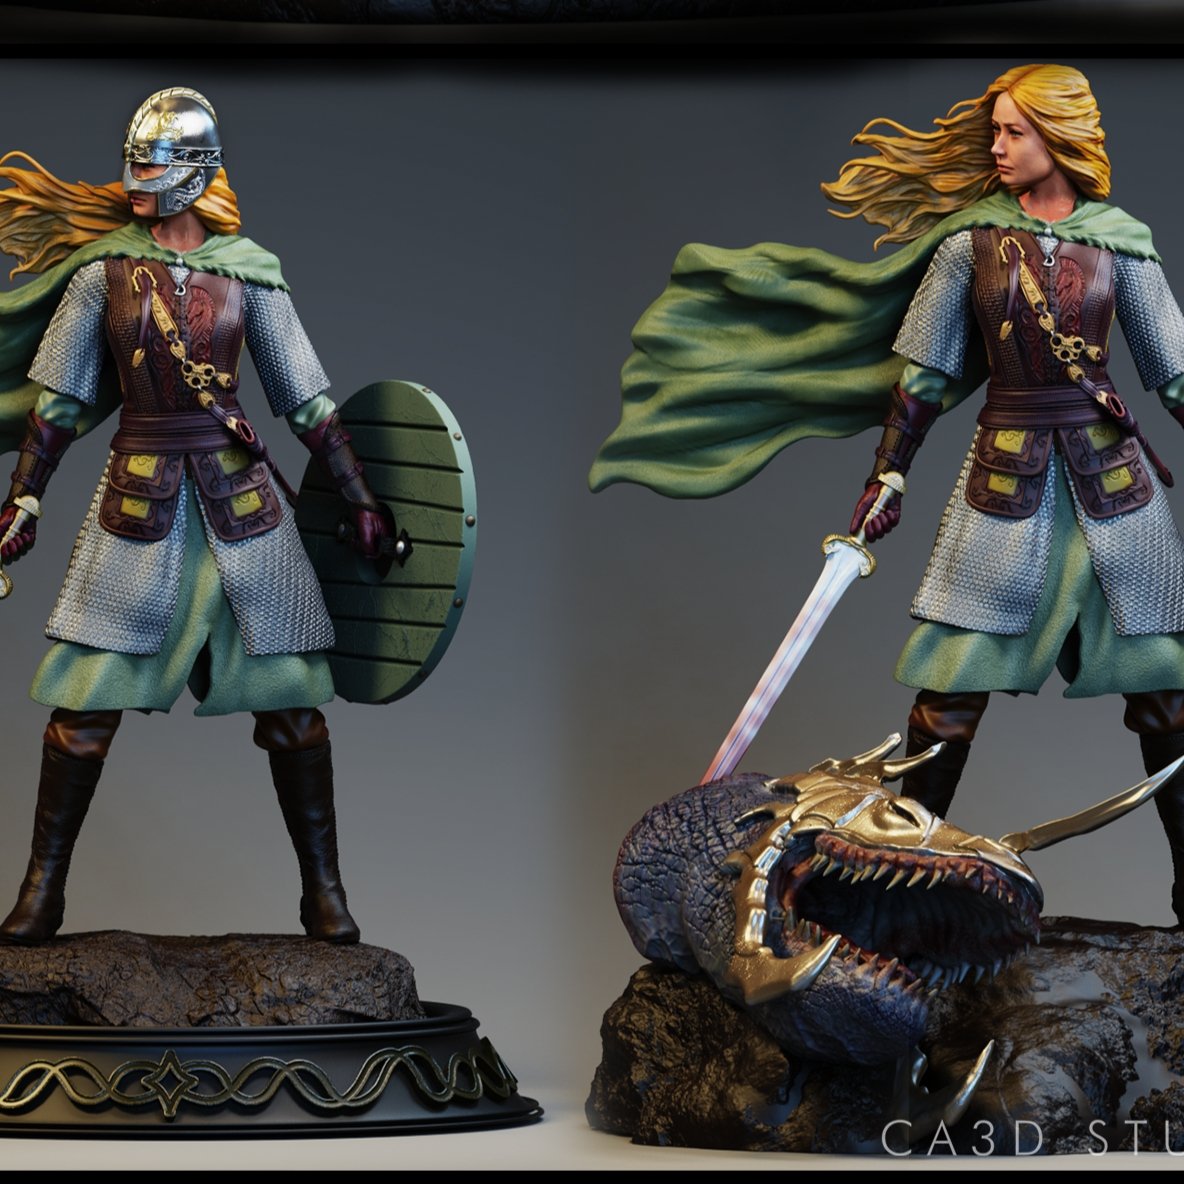 Éowyn 3D Printed Miniature FunArt Statues & Figurines & Collectible Unpainted by ca_3d_art